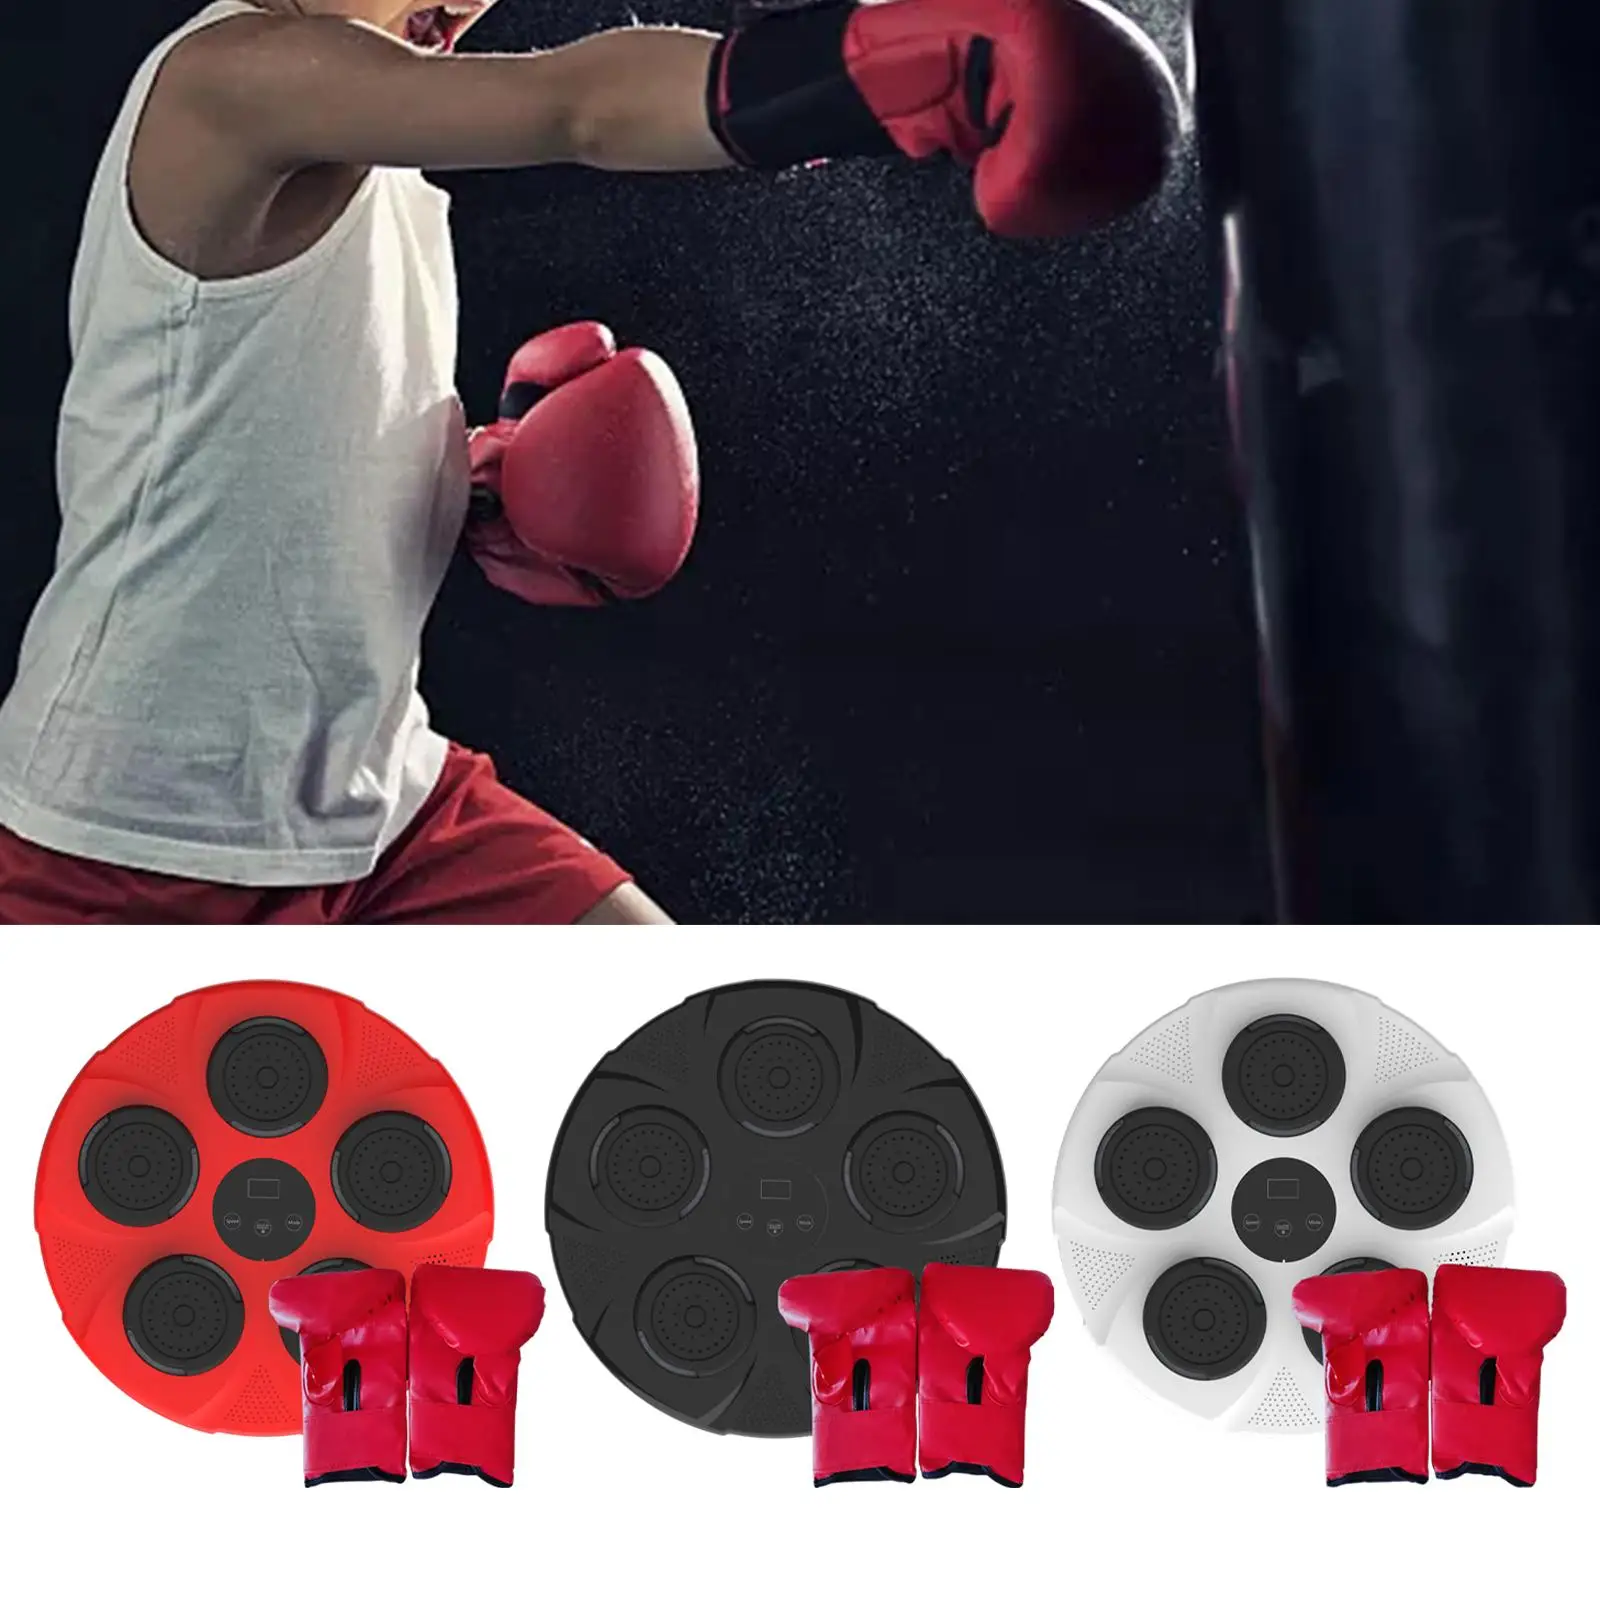 Boxing Machine Music Boxing Wall Target Adjustable for Kids Adults with Light for Sports Indoor Strength Training Gym Kickboxing